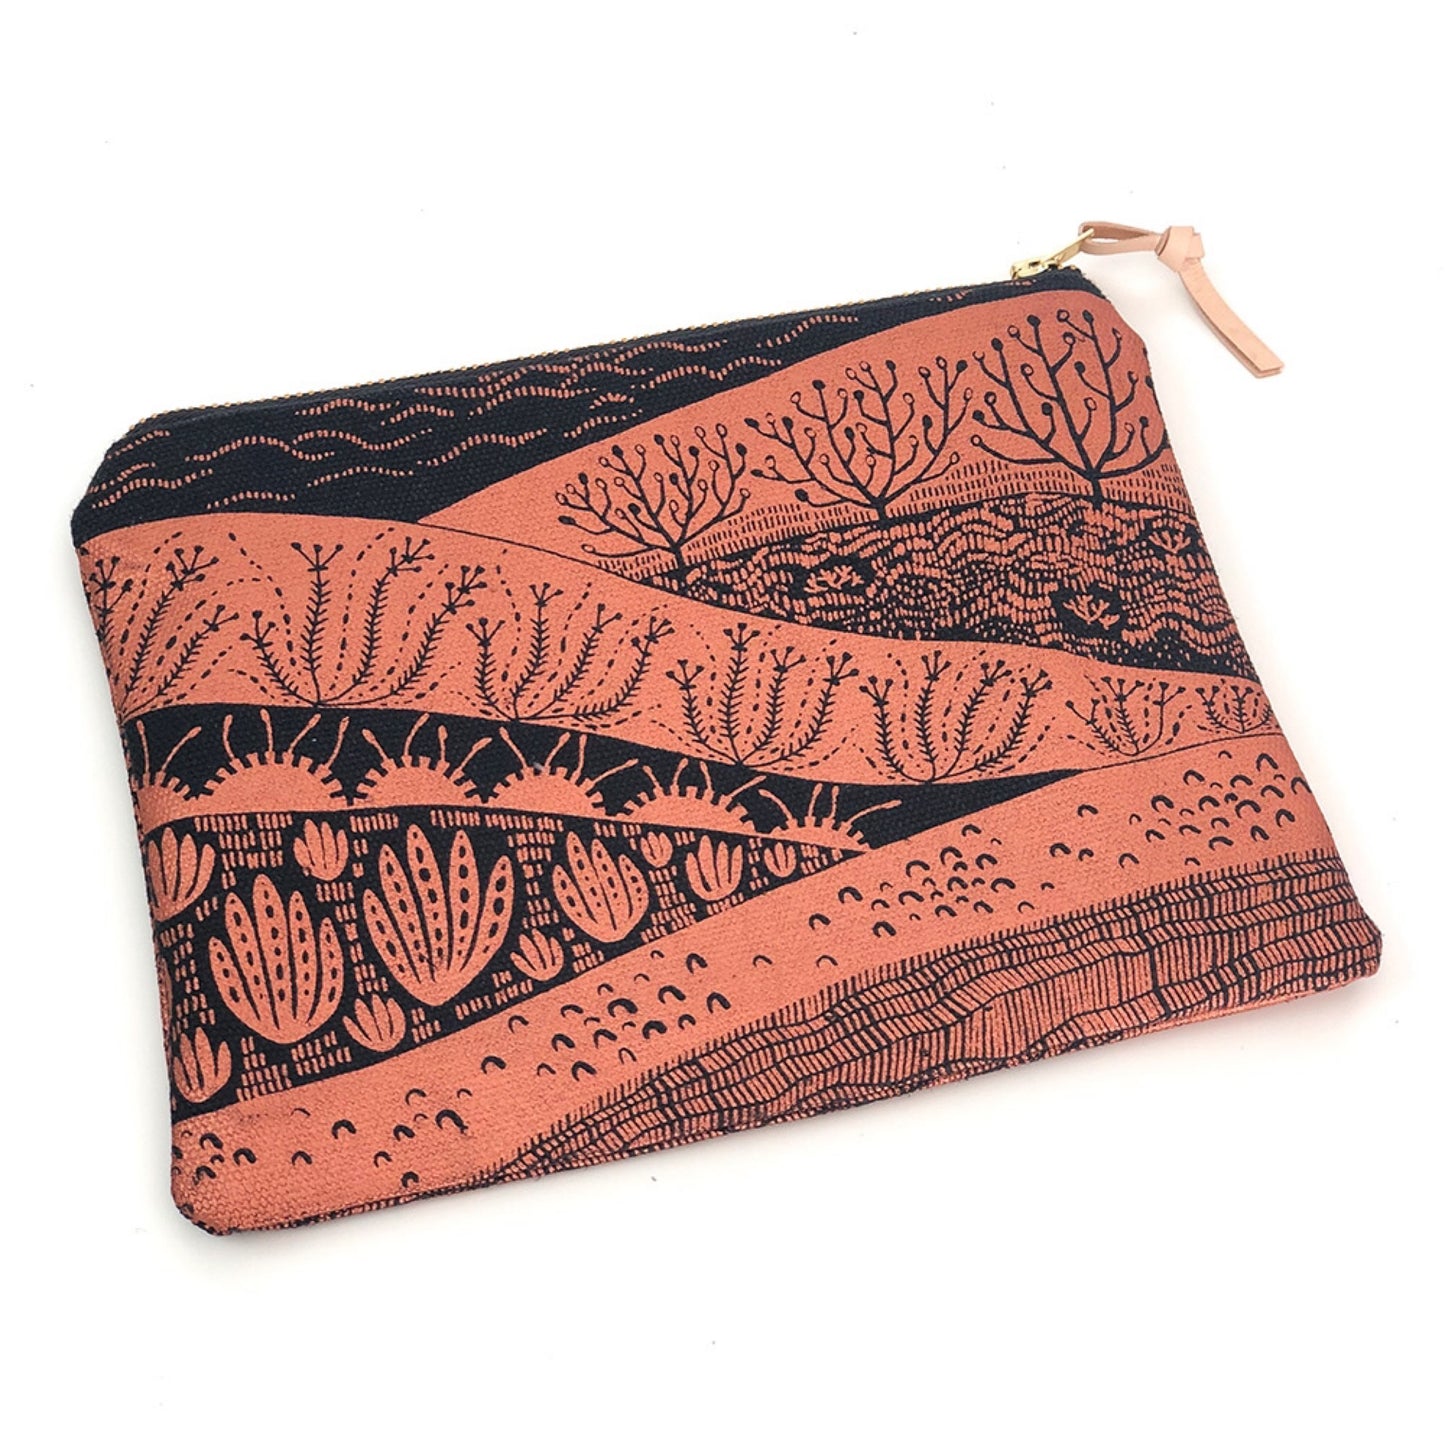 One Thousand Lines Sand Dunes Pouch - Copper